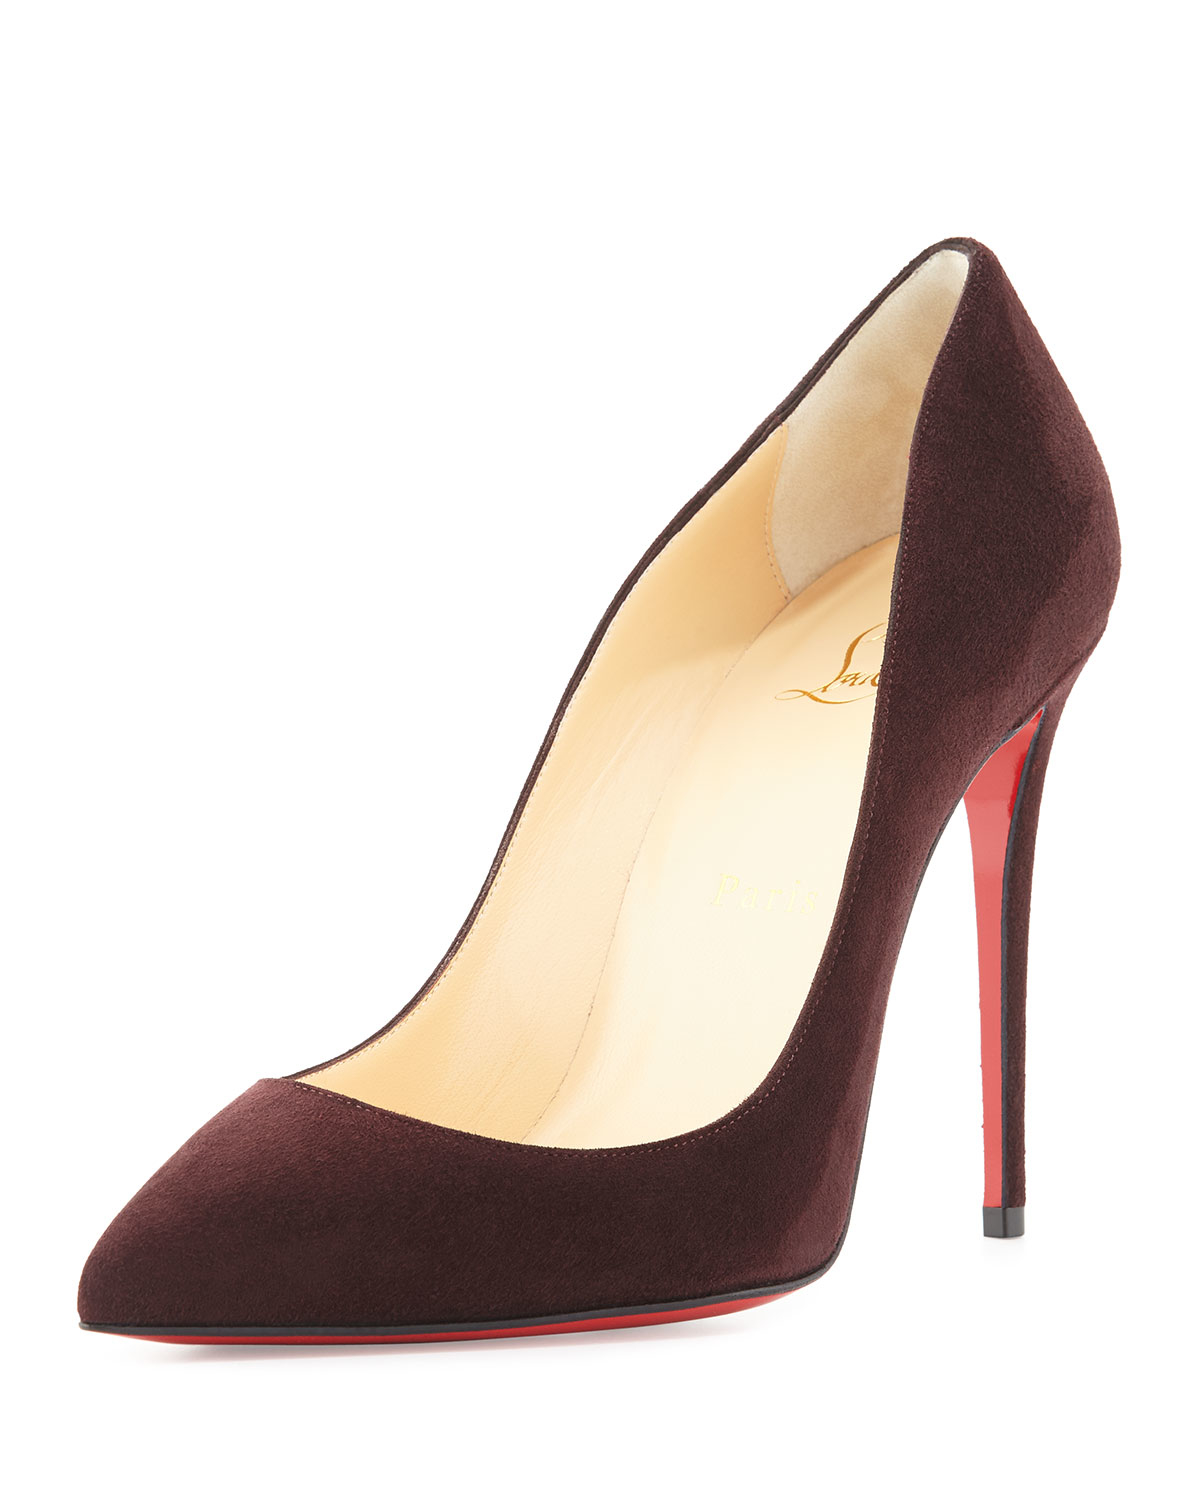 blue louboutins mens - christian louboutin pumps Purple suede pointed toes | The Little ...